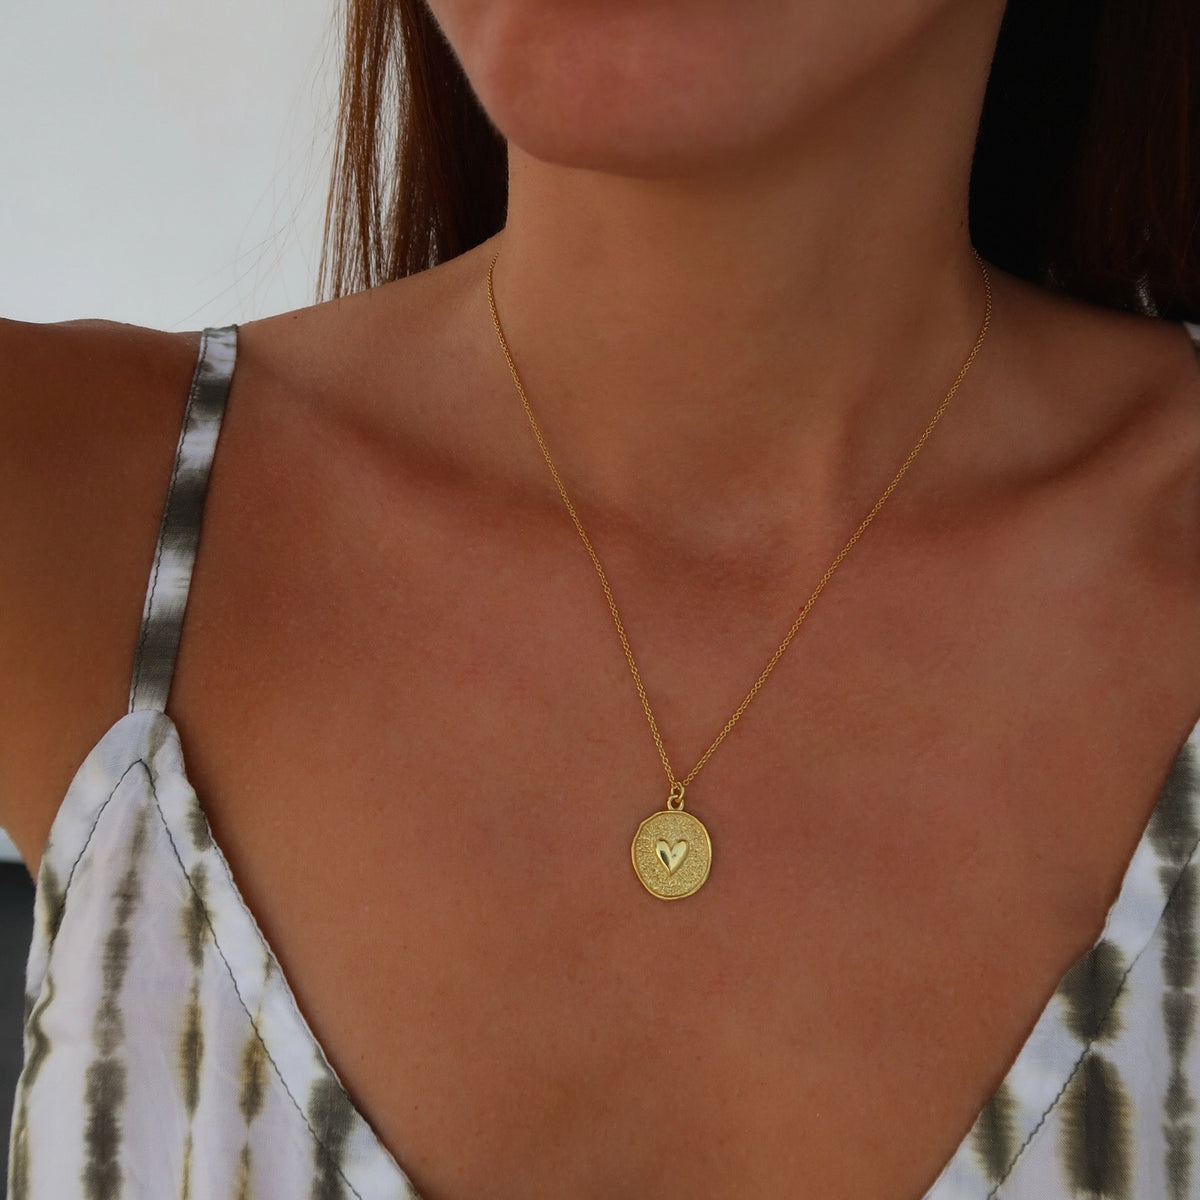 Chloe Love Necklace, 18k gold plated